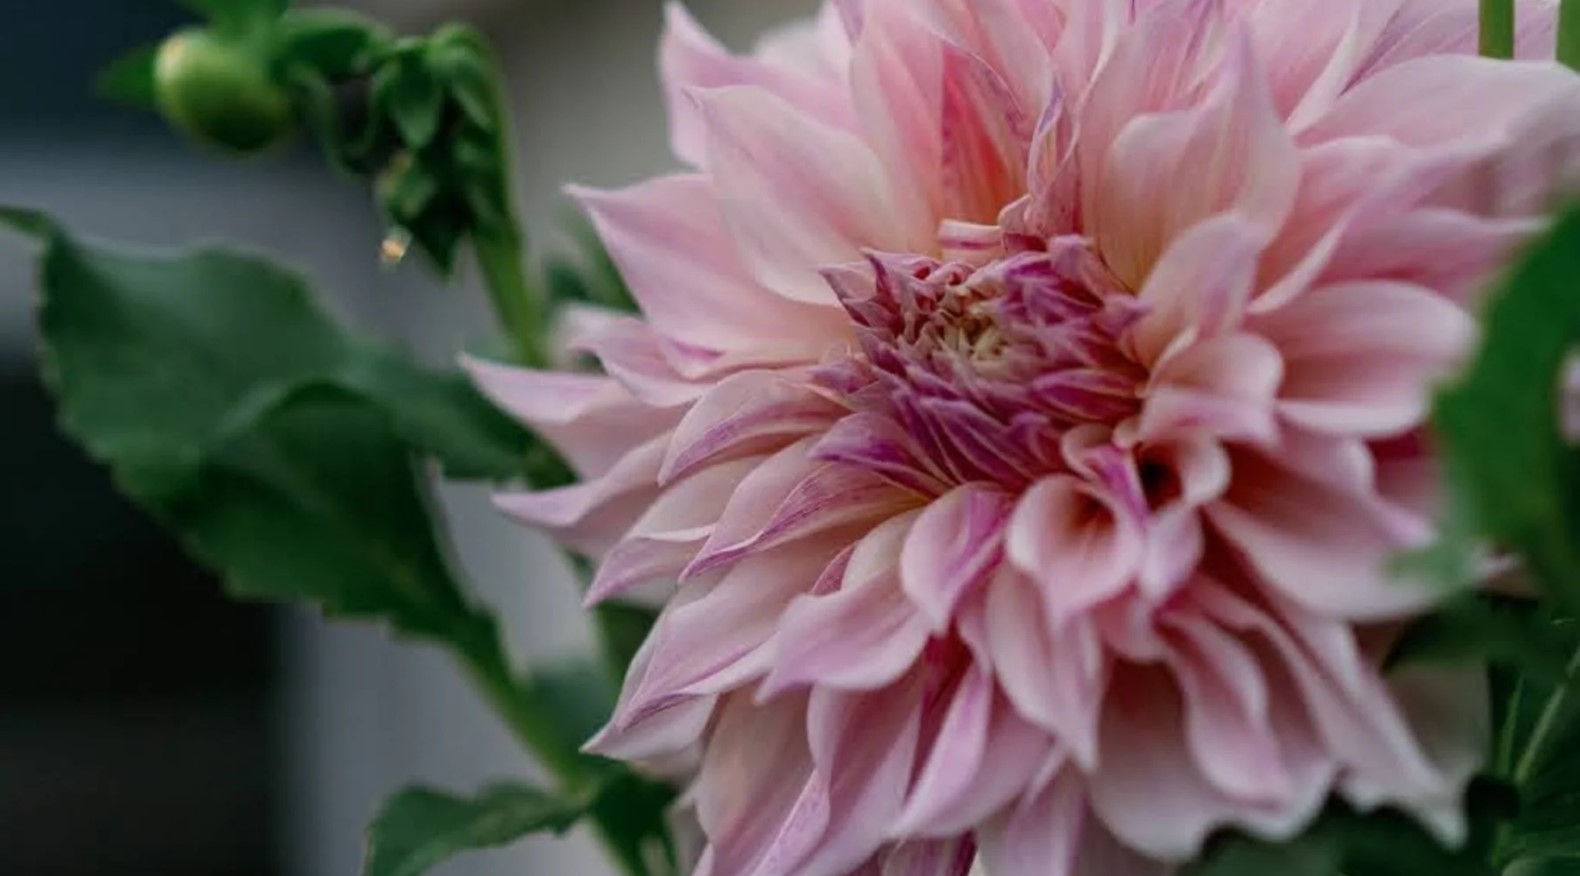 The resilience of the Dahlia Plant